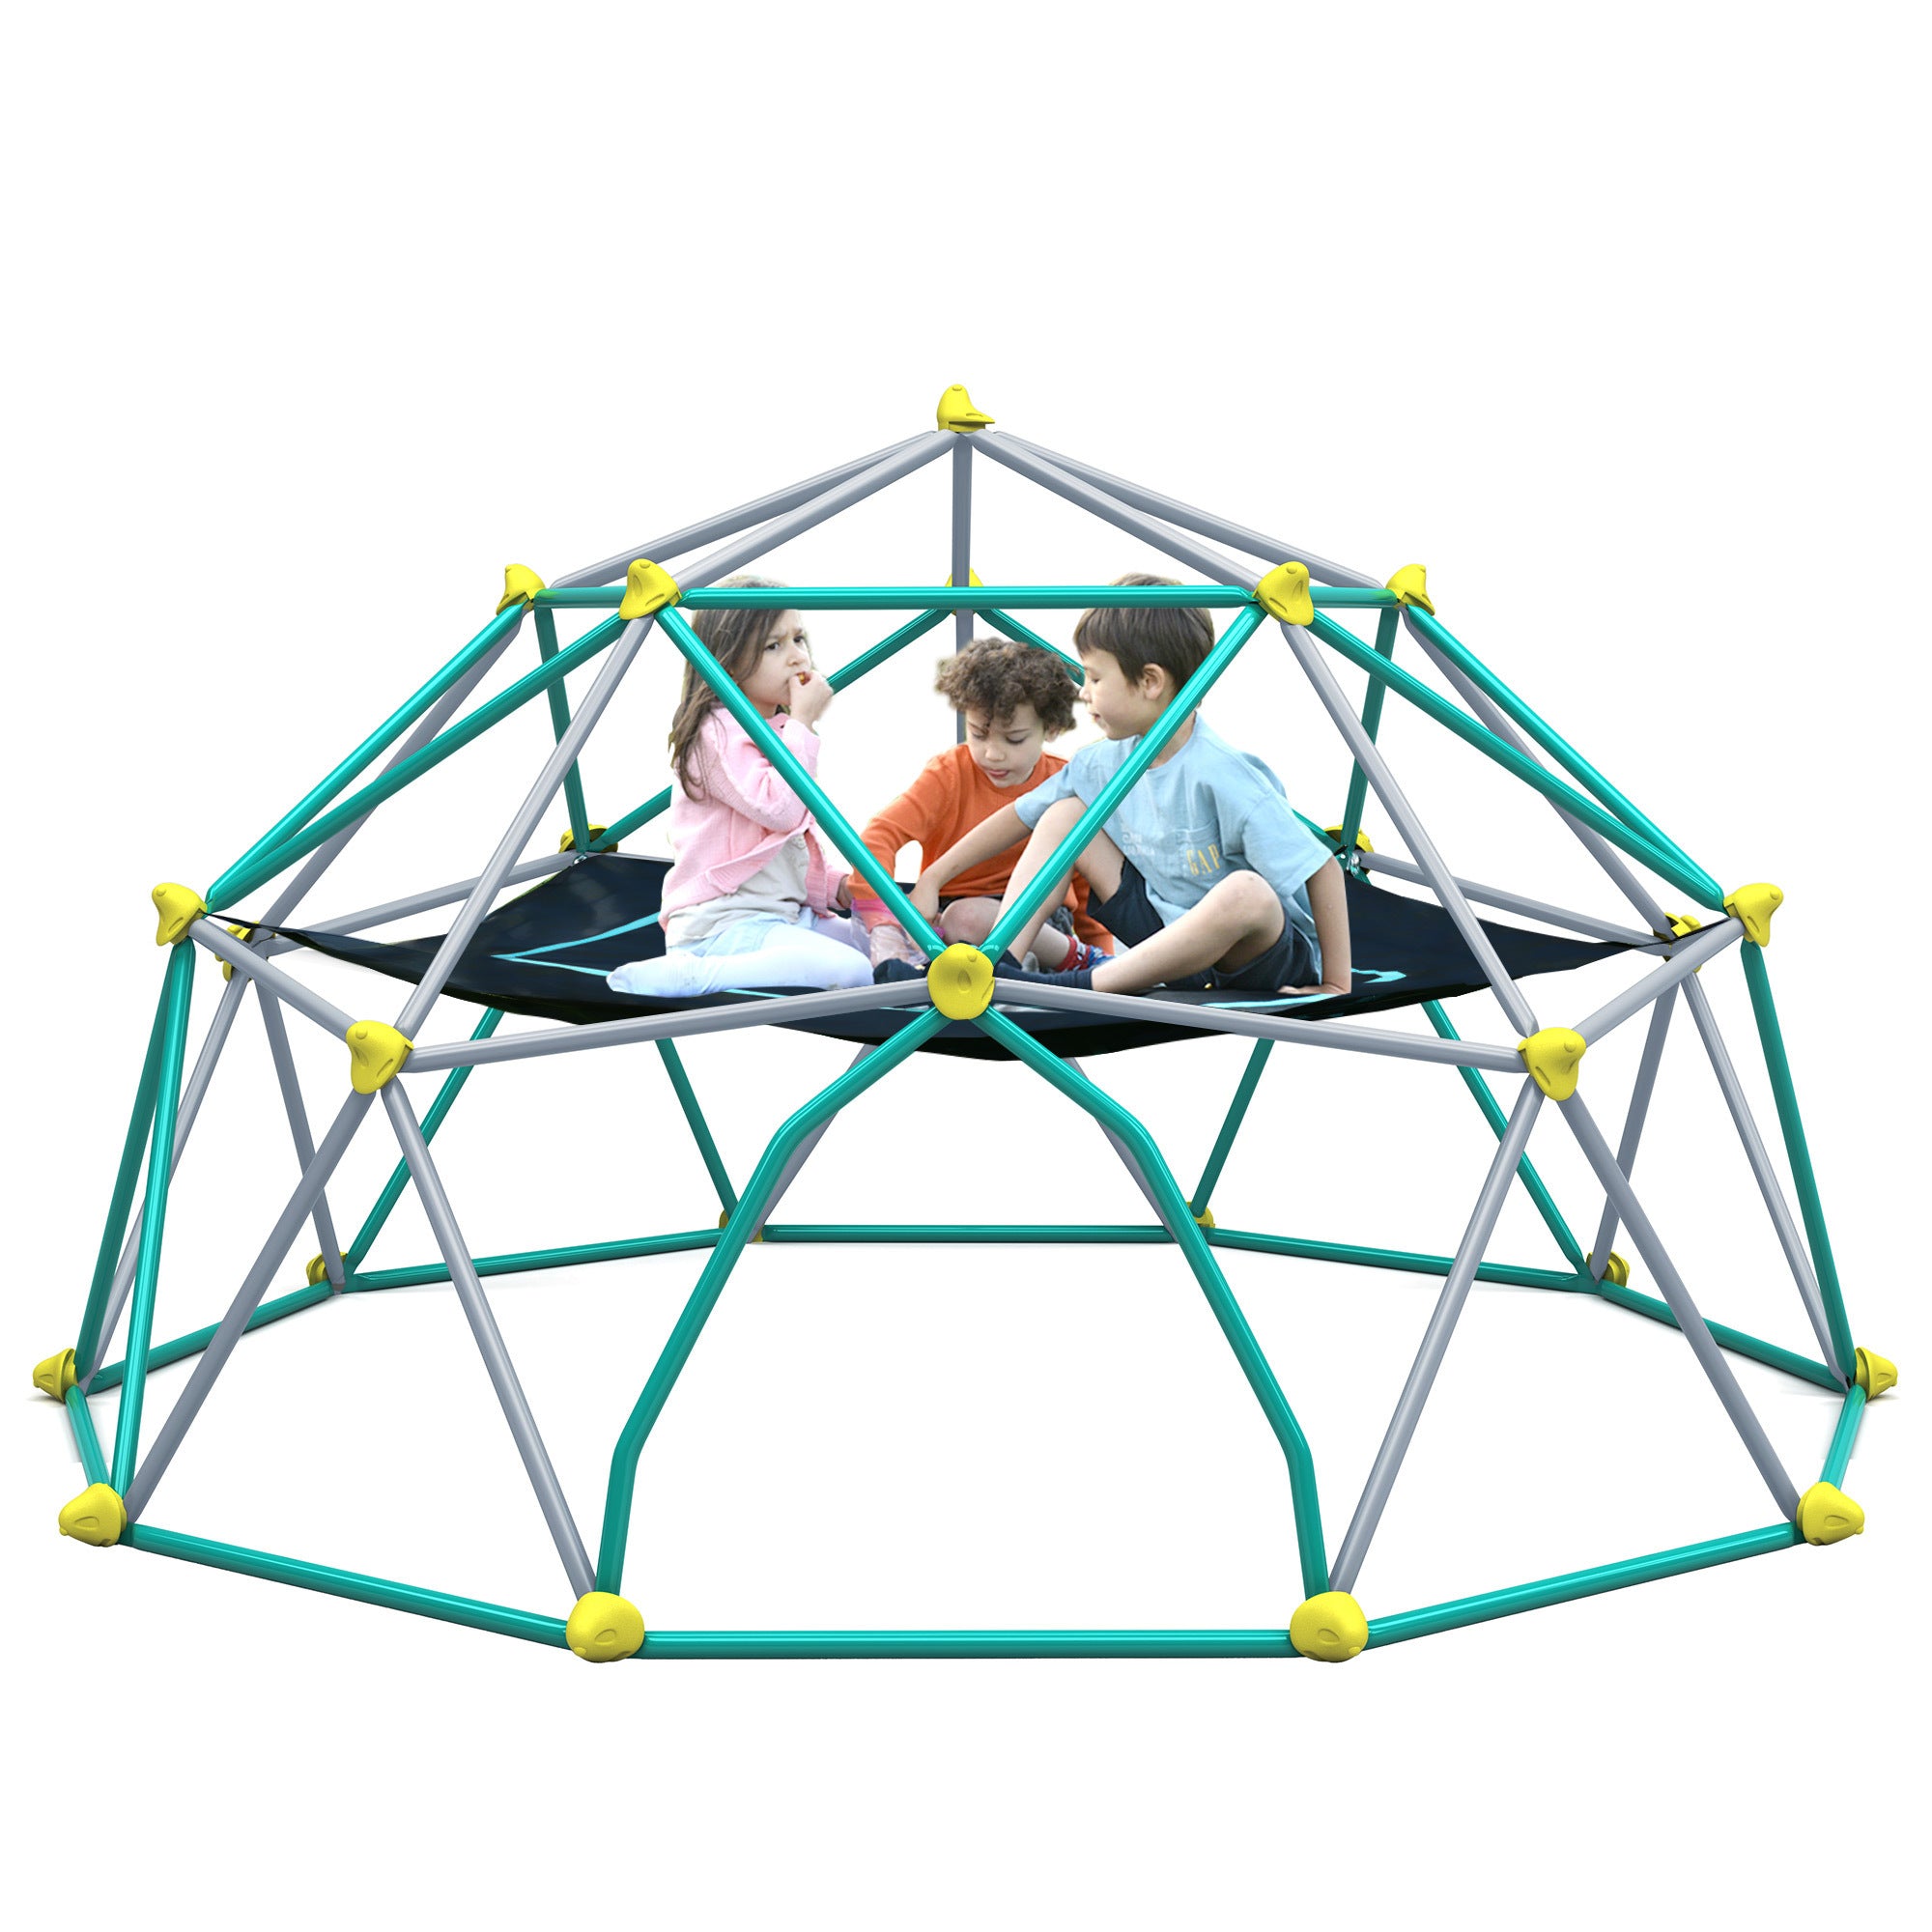 10ft-Geometric-Dome-Climber-Play-Center,-Kids-Climbing-Dome-Tower-with-Hammock,-Rust-&-UV-Resistant-Steel-Supporting-1000-LBS-climbing